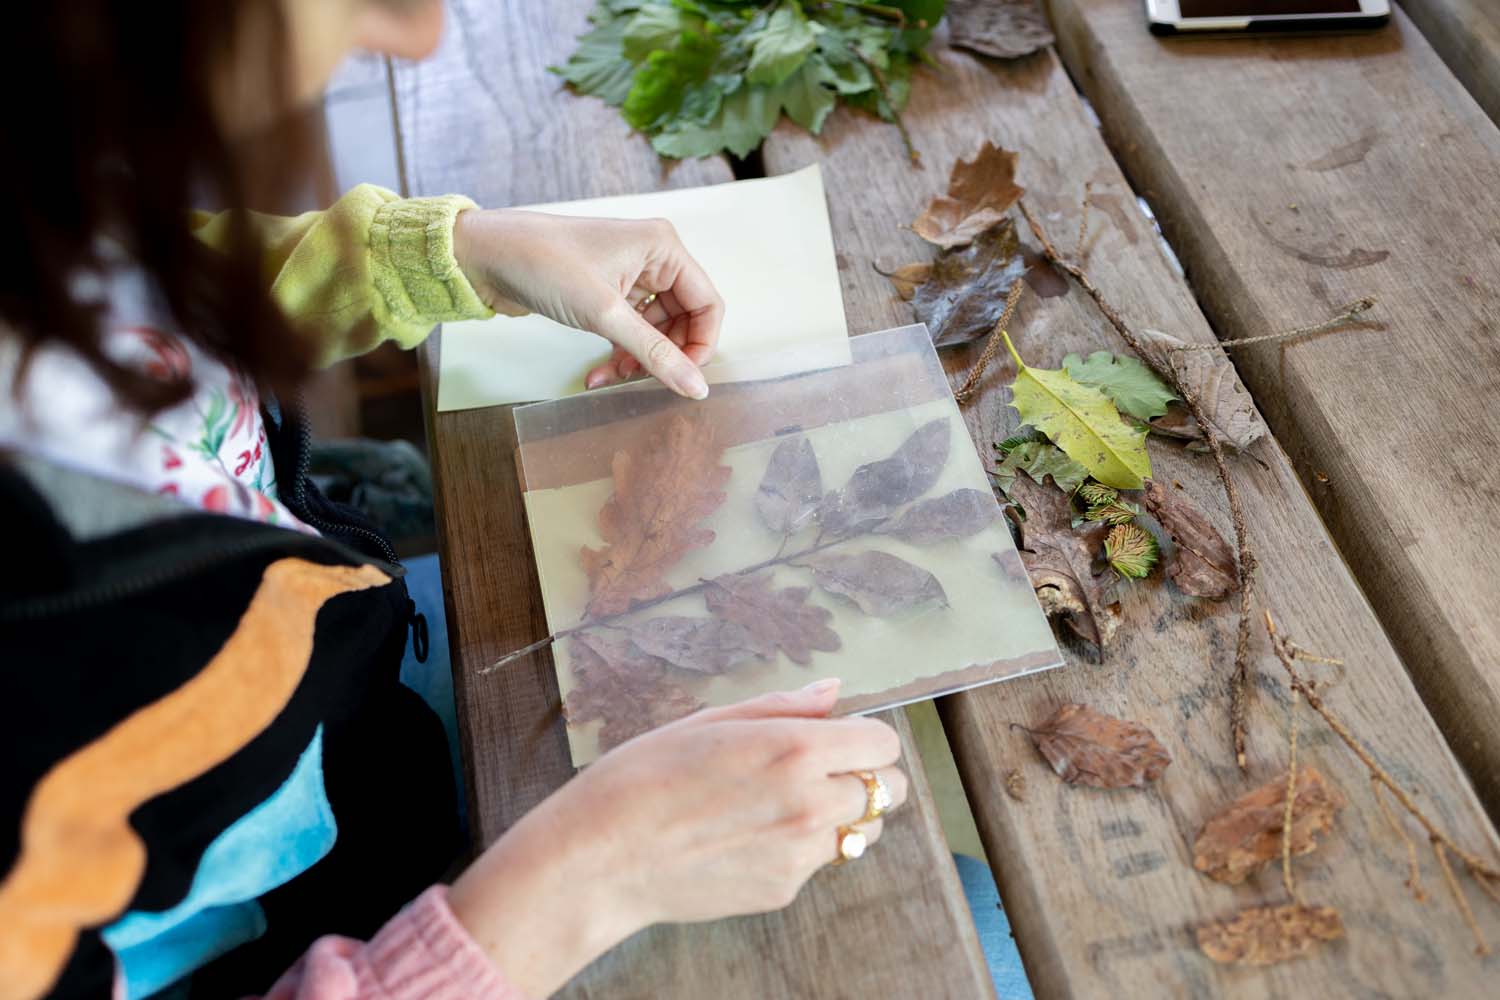 An artist is making a cyanotype using leaves